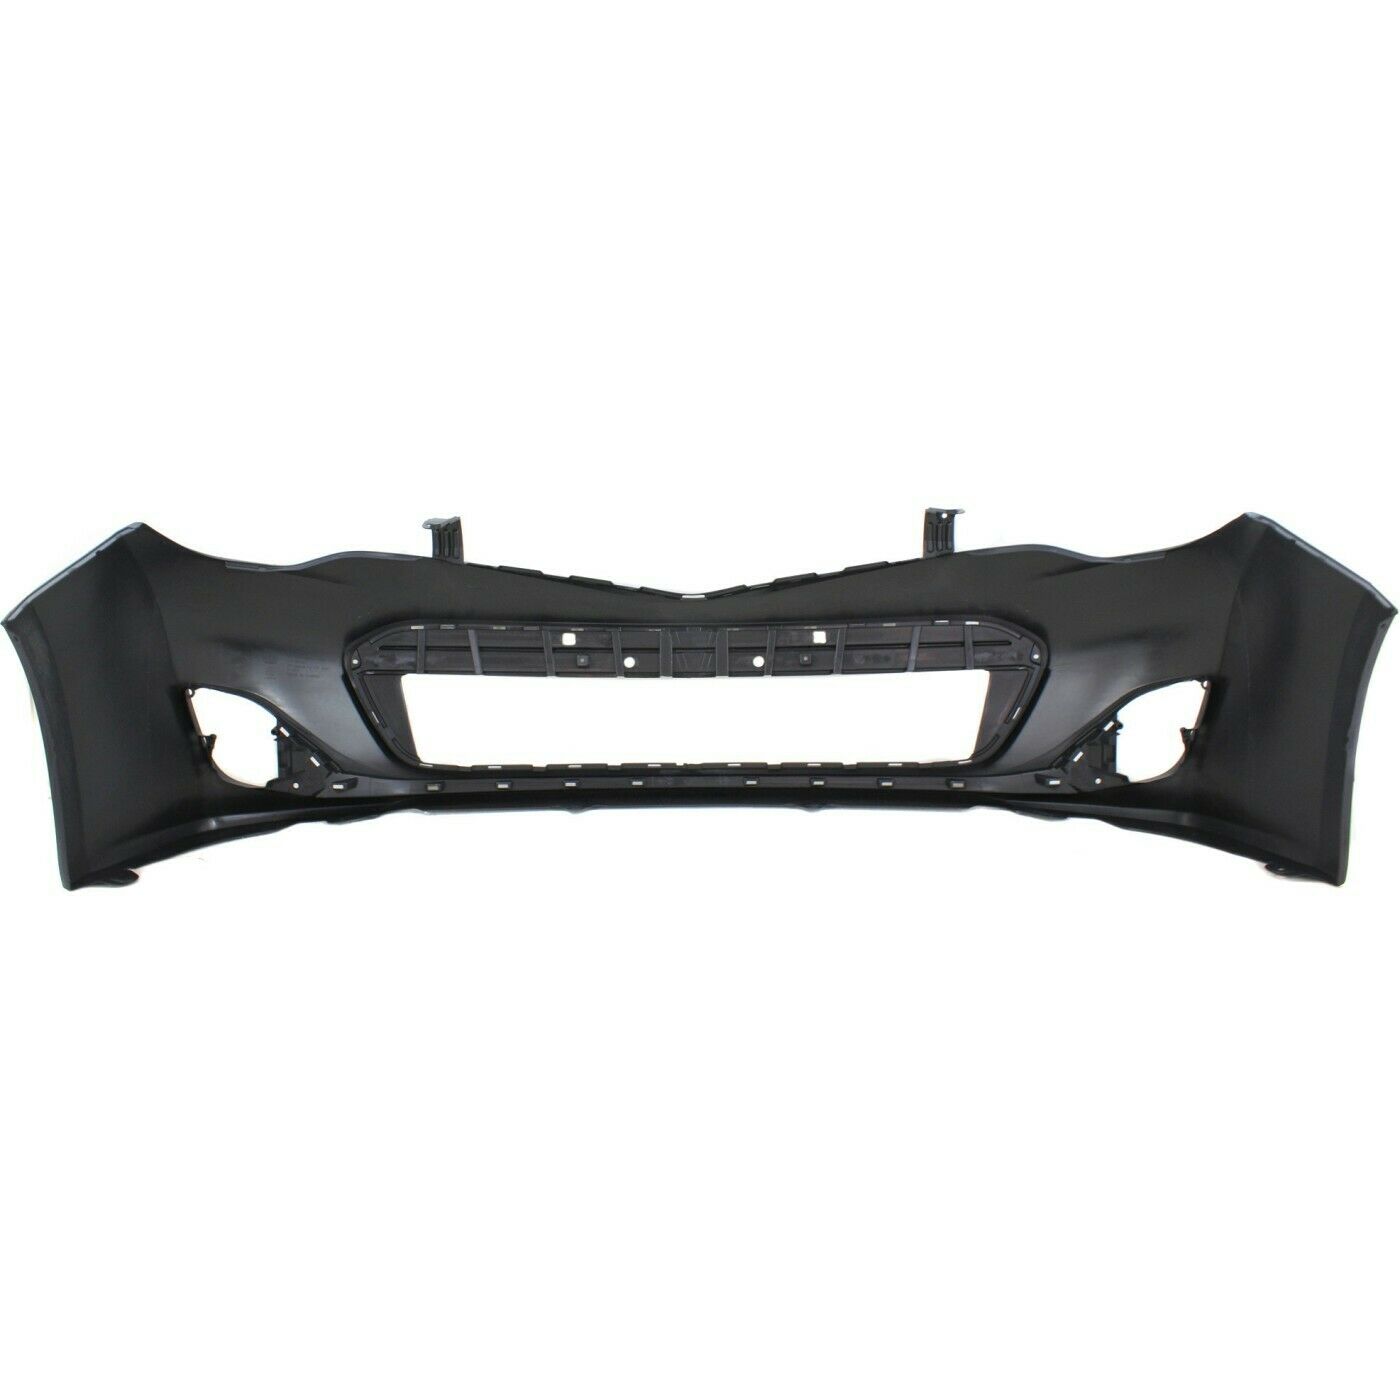 Toyota Avalon 2013 - 2015 Front Bumper Cover 13 - 15 TO1000396 Bumper-King